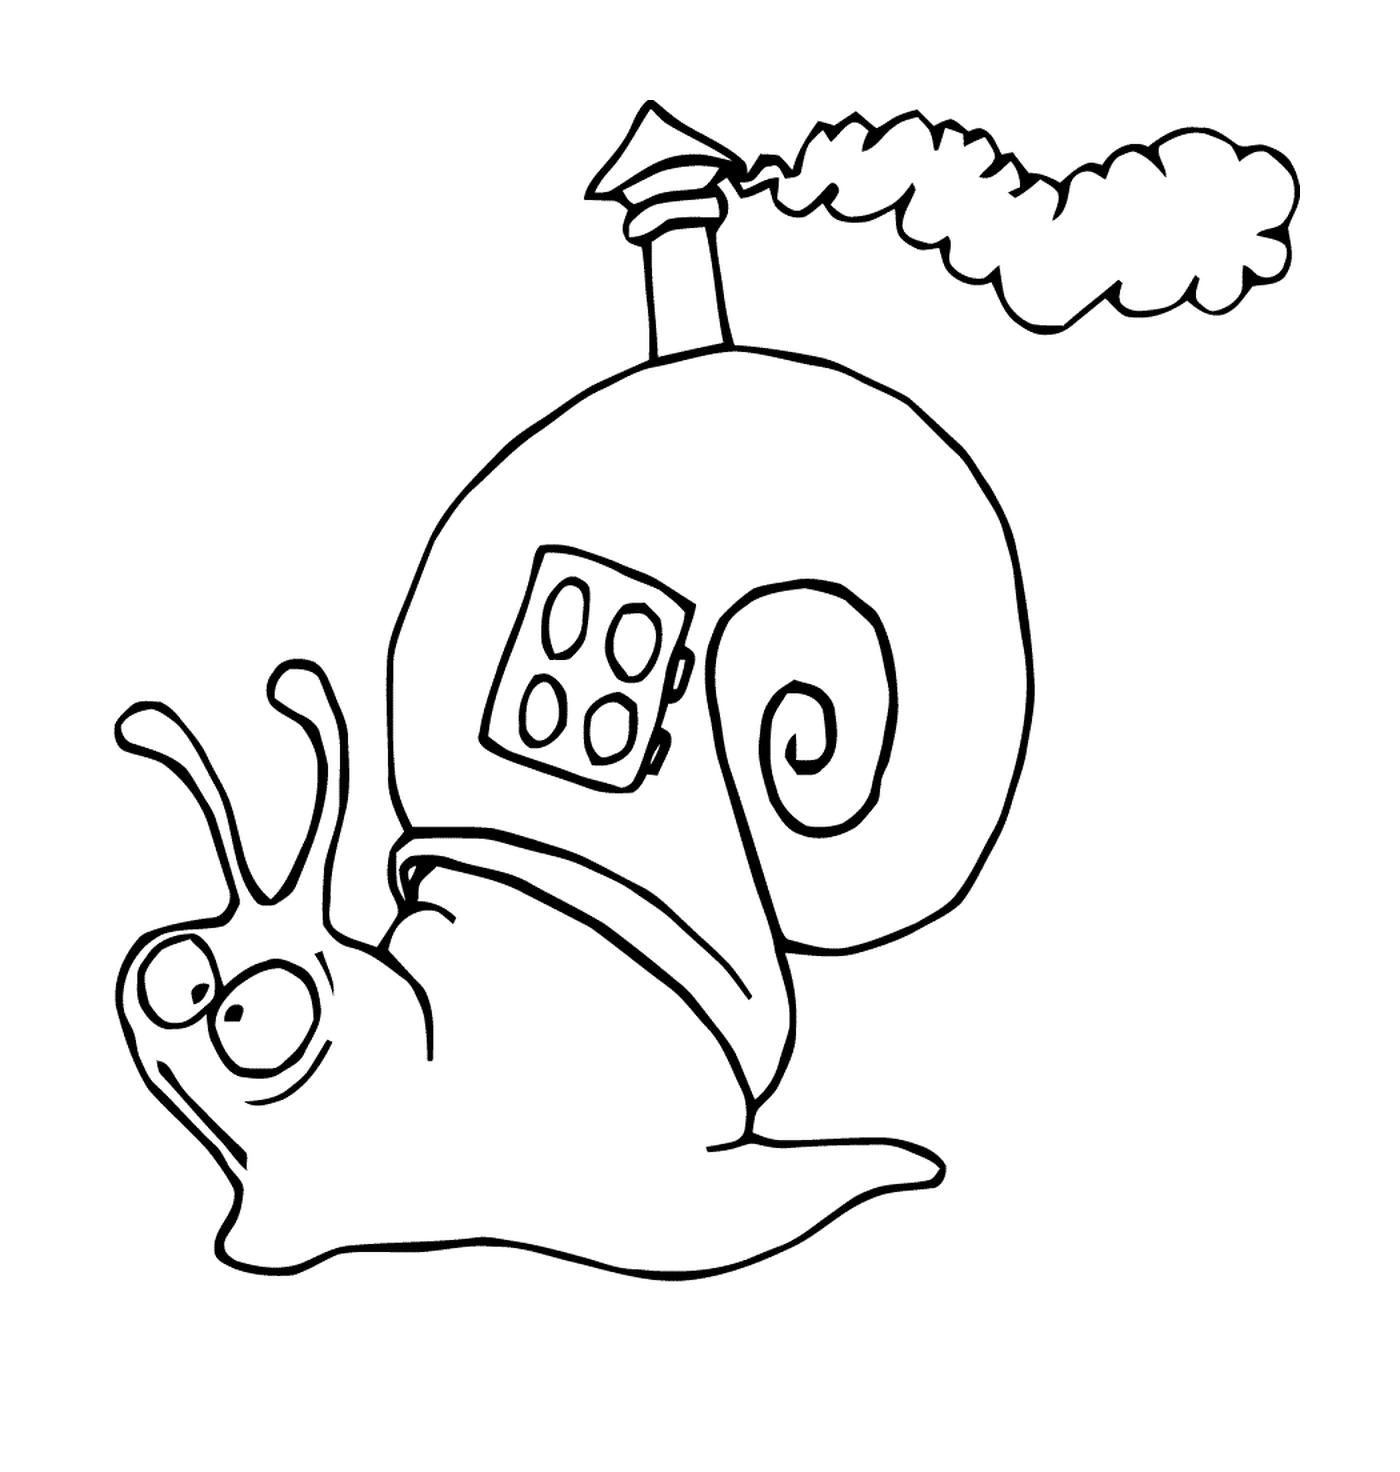  Hugo snail with smoke coming out of his shell 